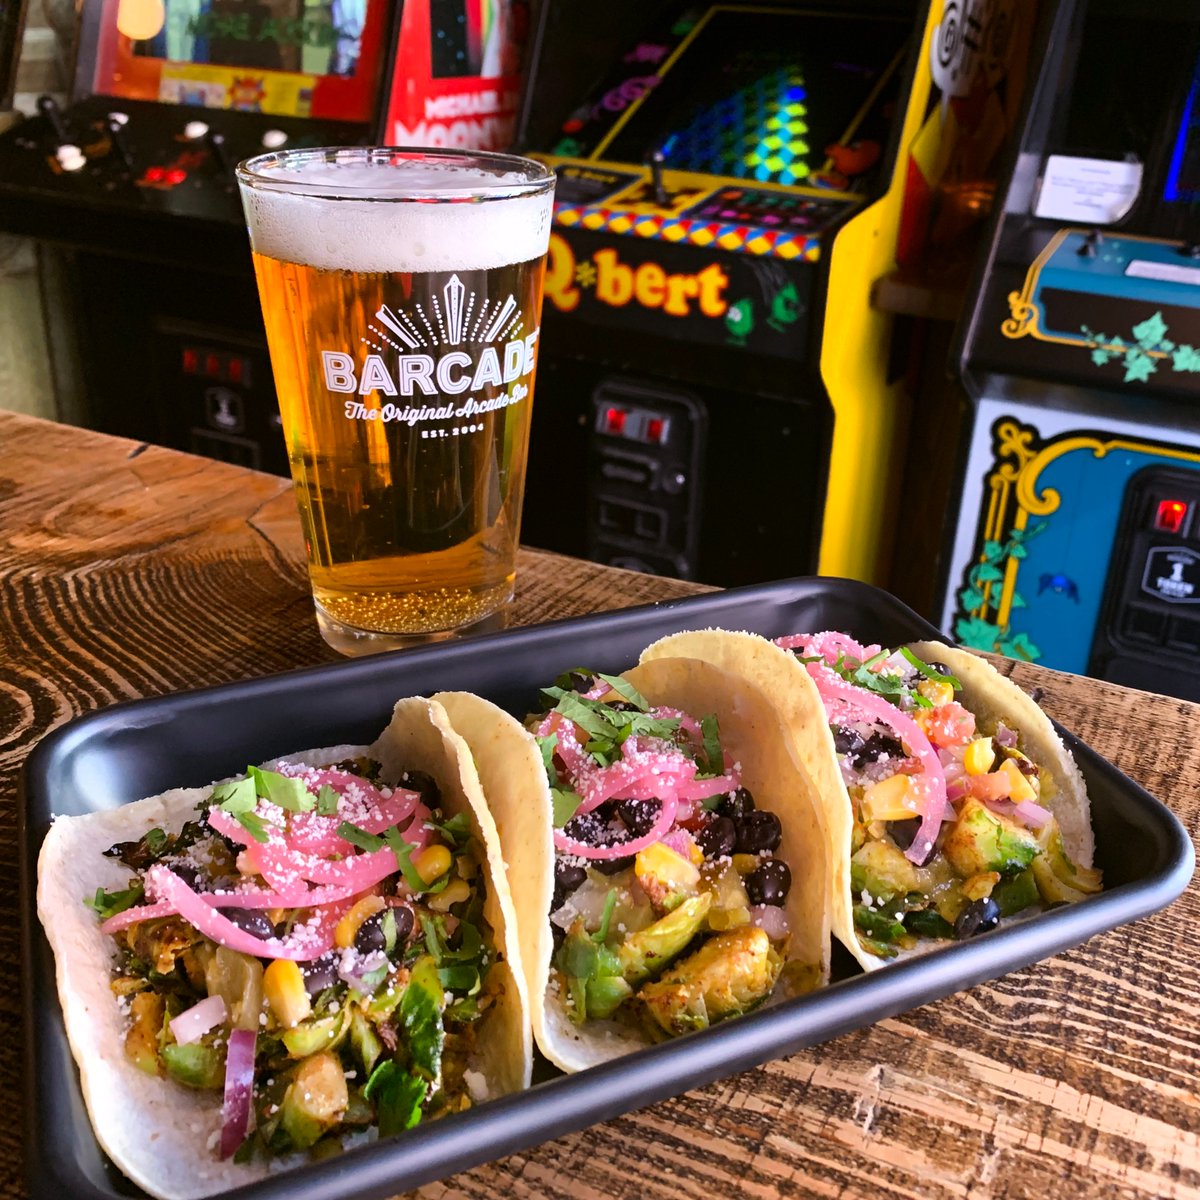 We're breaking out the brussel sprouts! Our Roasted Brussel Sprout Tacos are topped with salsa verde, corn salsa, pickled onions and cotija cheese — and best enjoyed with a beer!!

#Barcade #Fishtown #Philly #Philadelphia #PhillyEats #PhillyFoodie #PhillyFoodies